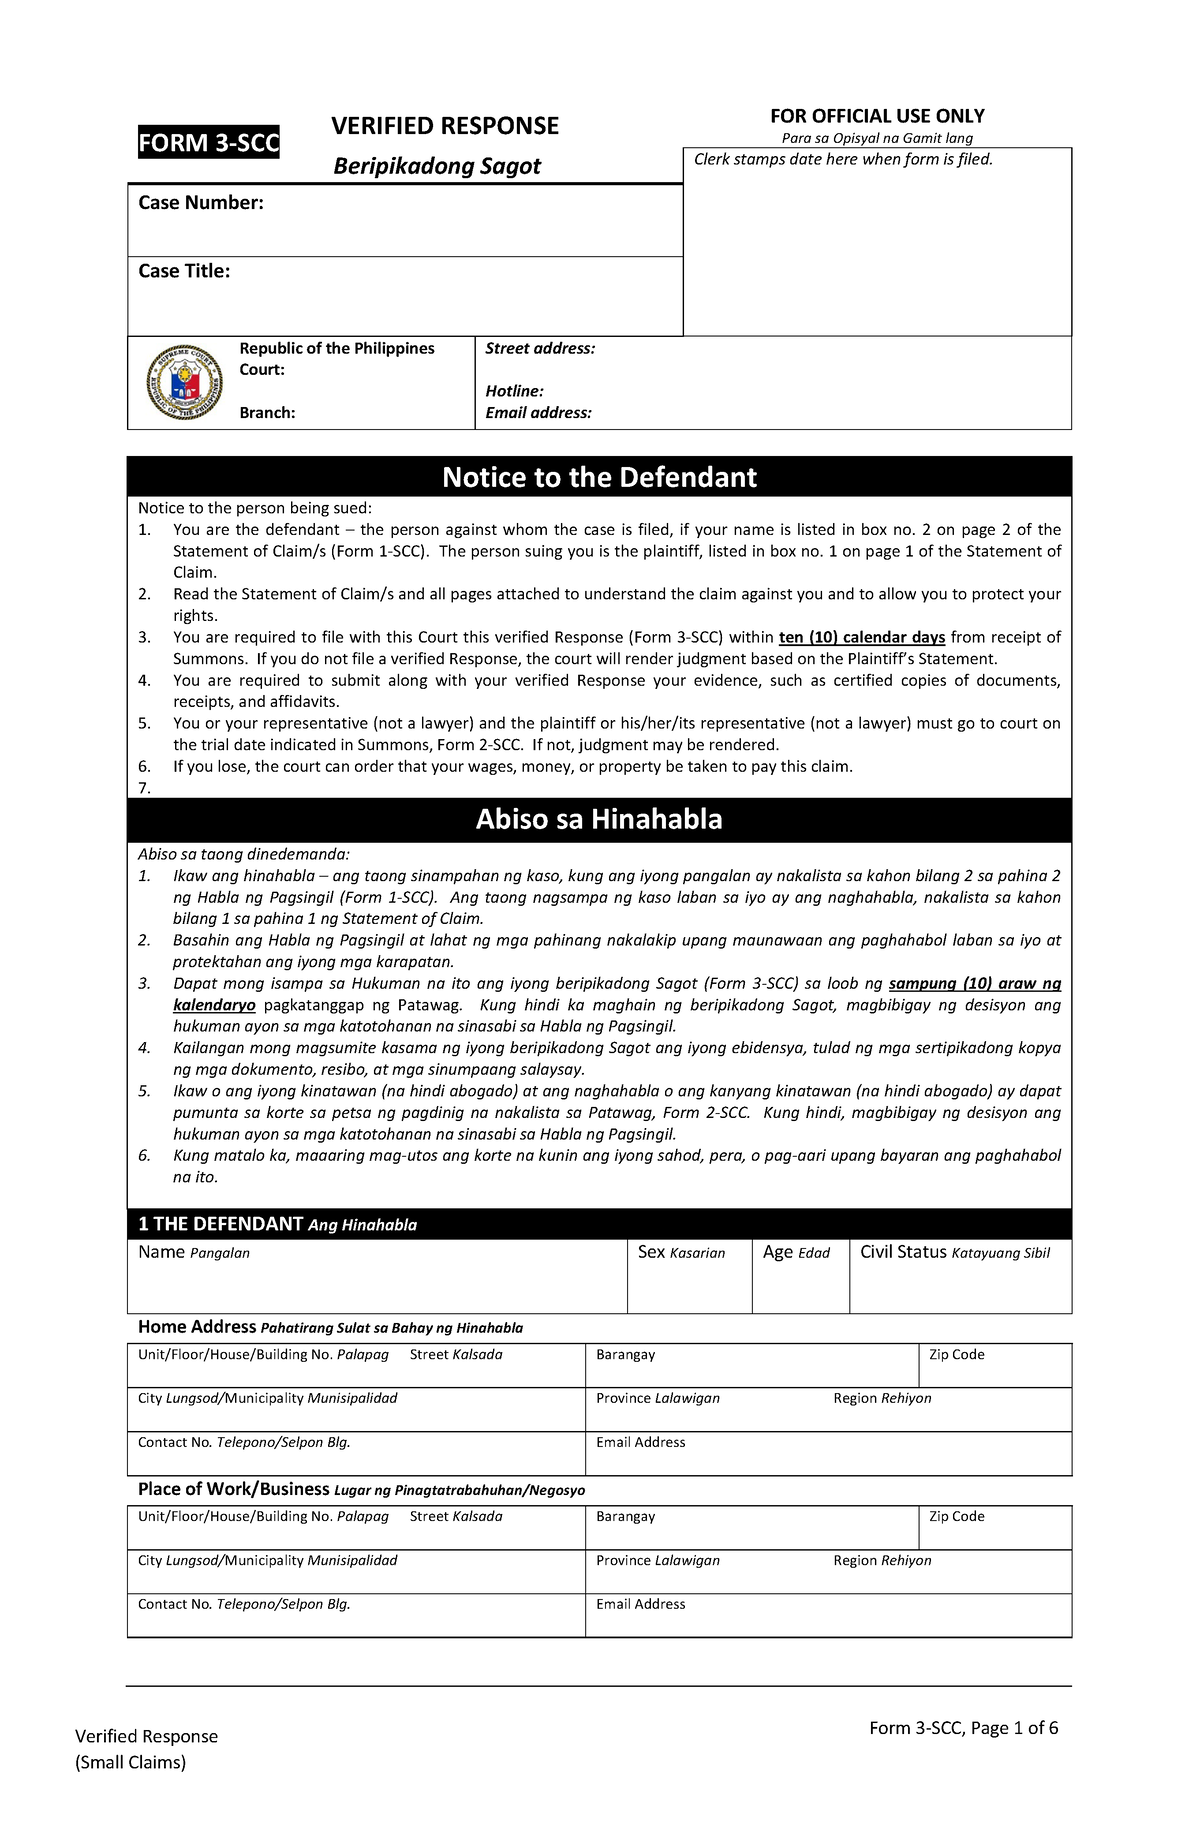 form-03-scc-response-small-claims-form-form-3-scc-page-1-of-6